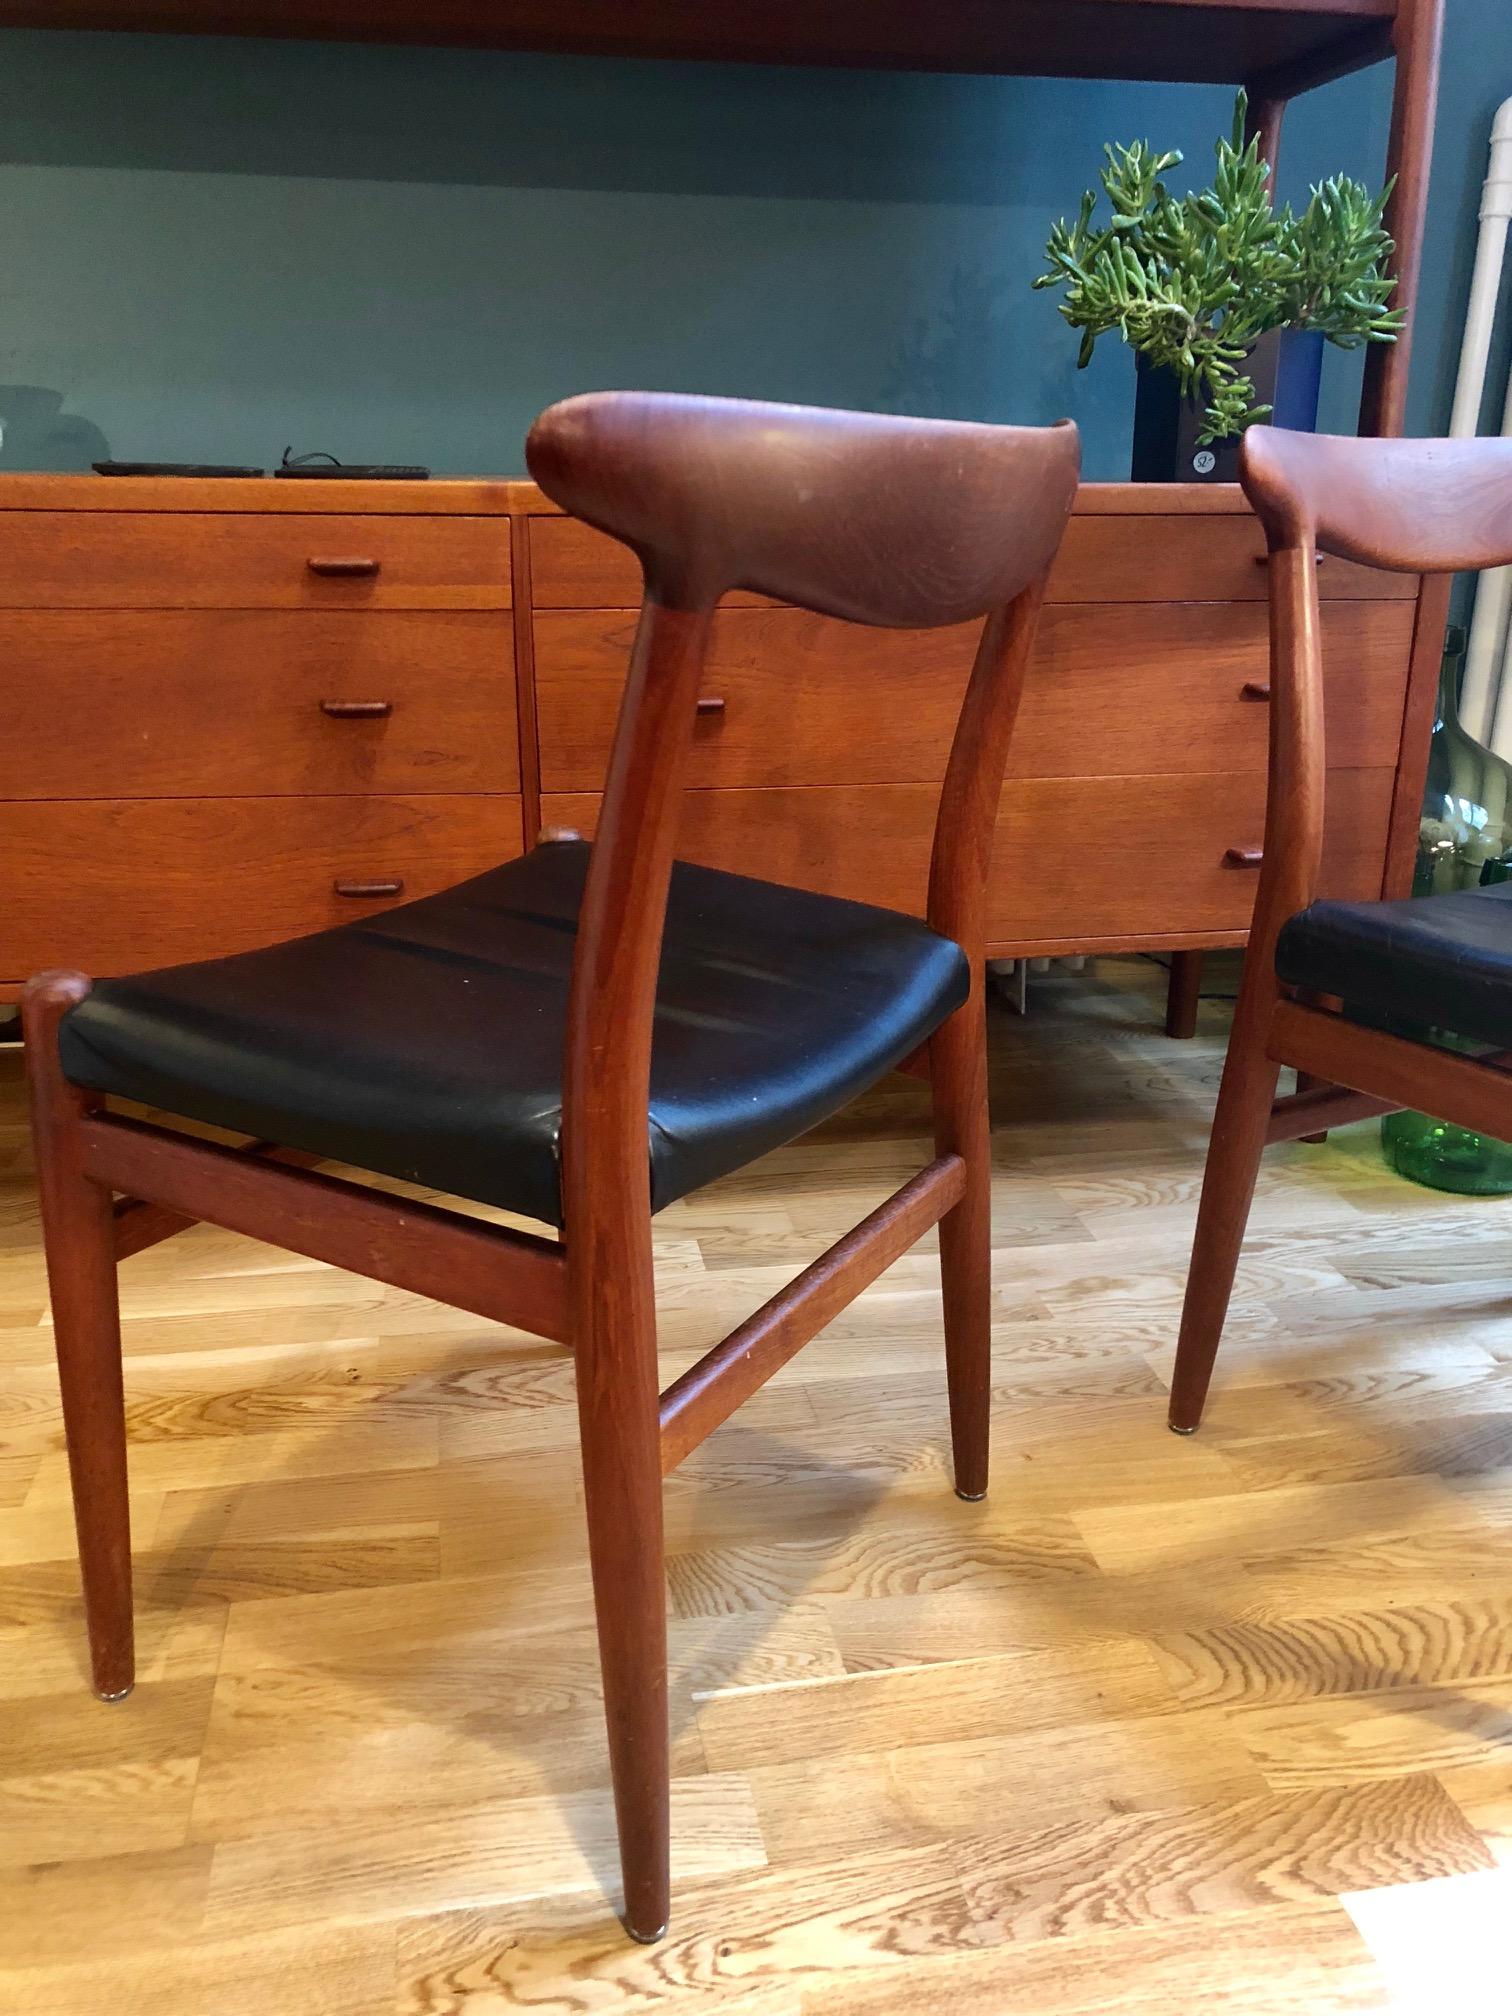 Beautiful, rare set of 2 Hans Wegner chairs made of teak and black leather. Comfortable and well preserved. Model W2 Production by C.M. Madsen Denmark 1953. Beautiful processing of teak. Marked.
 